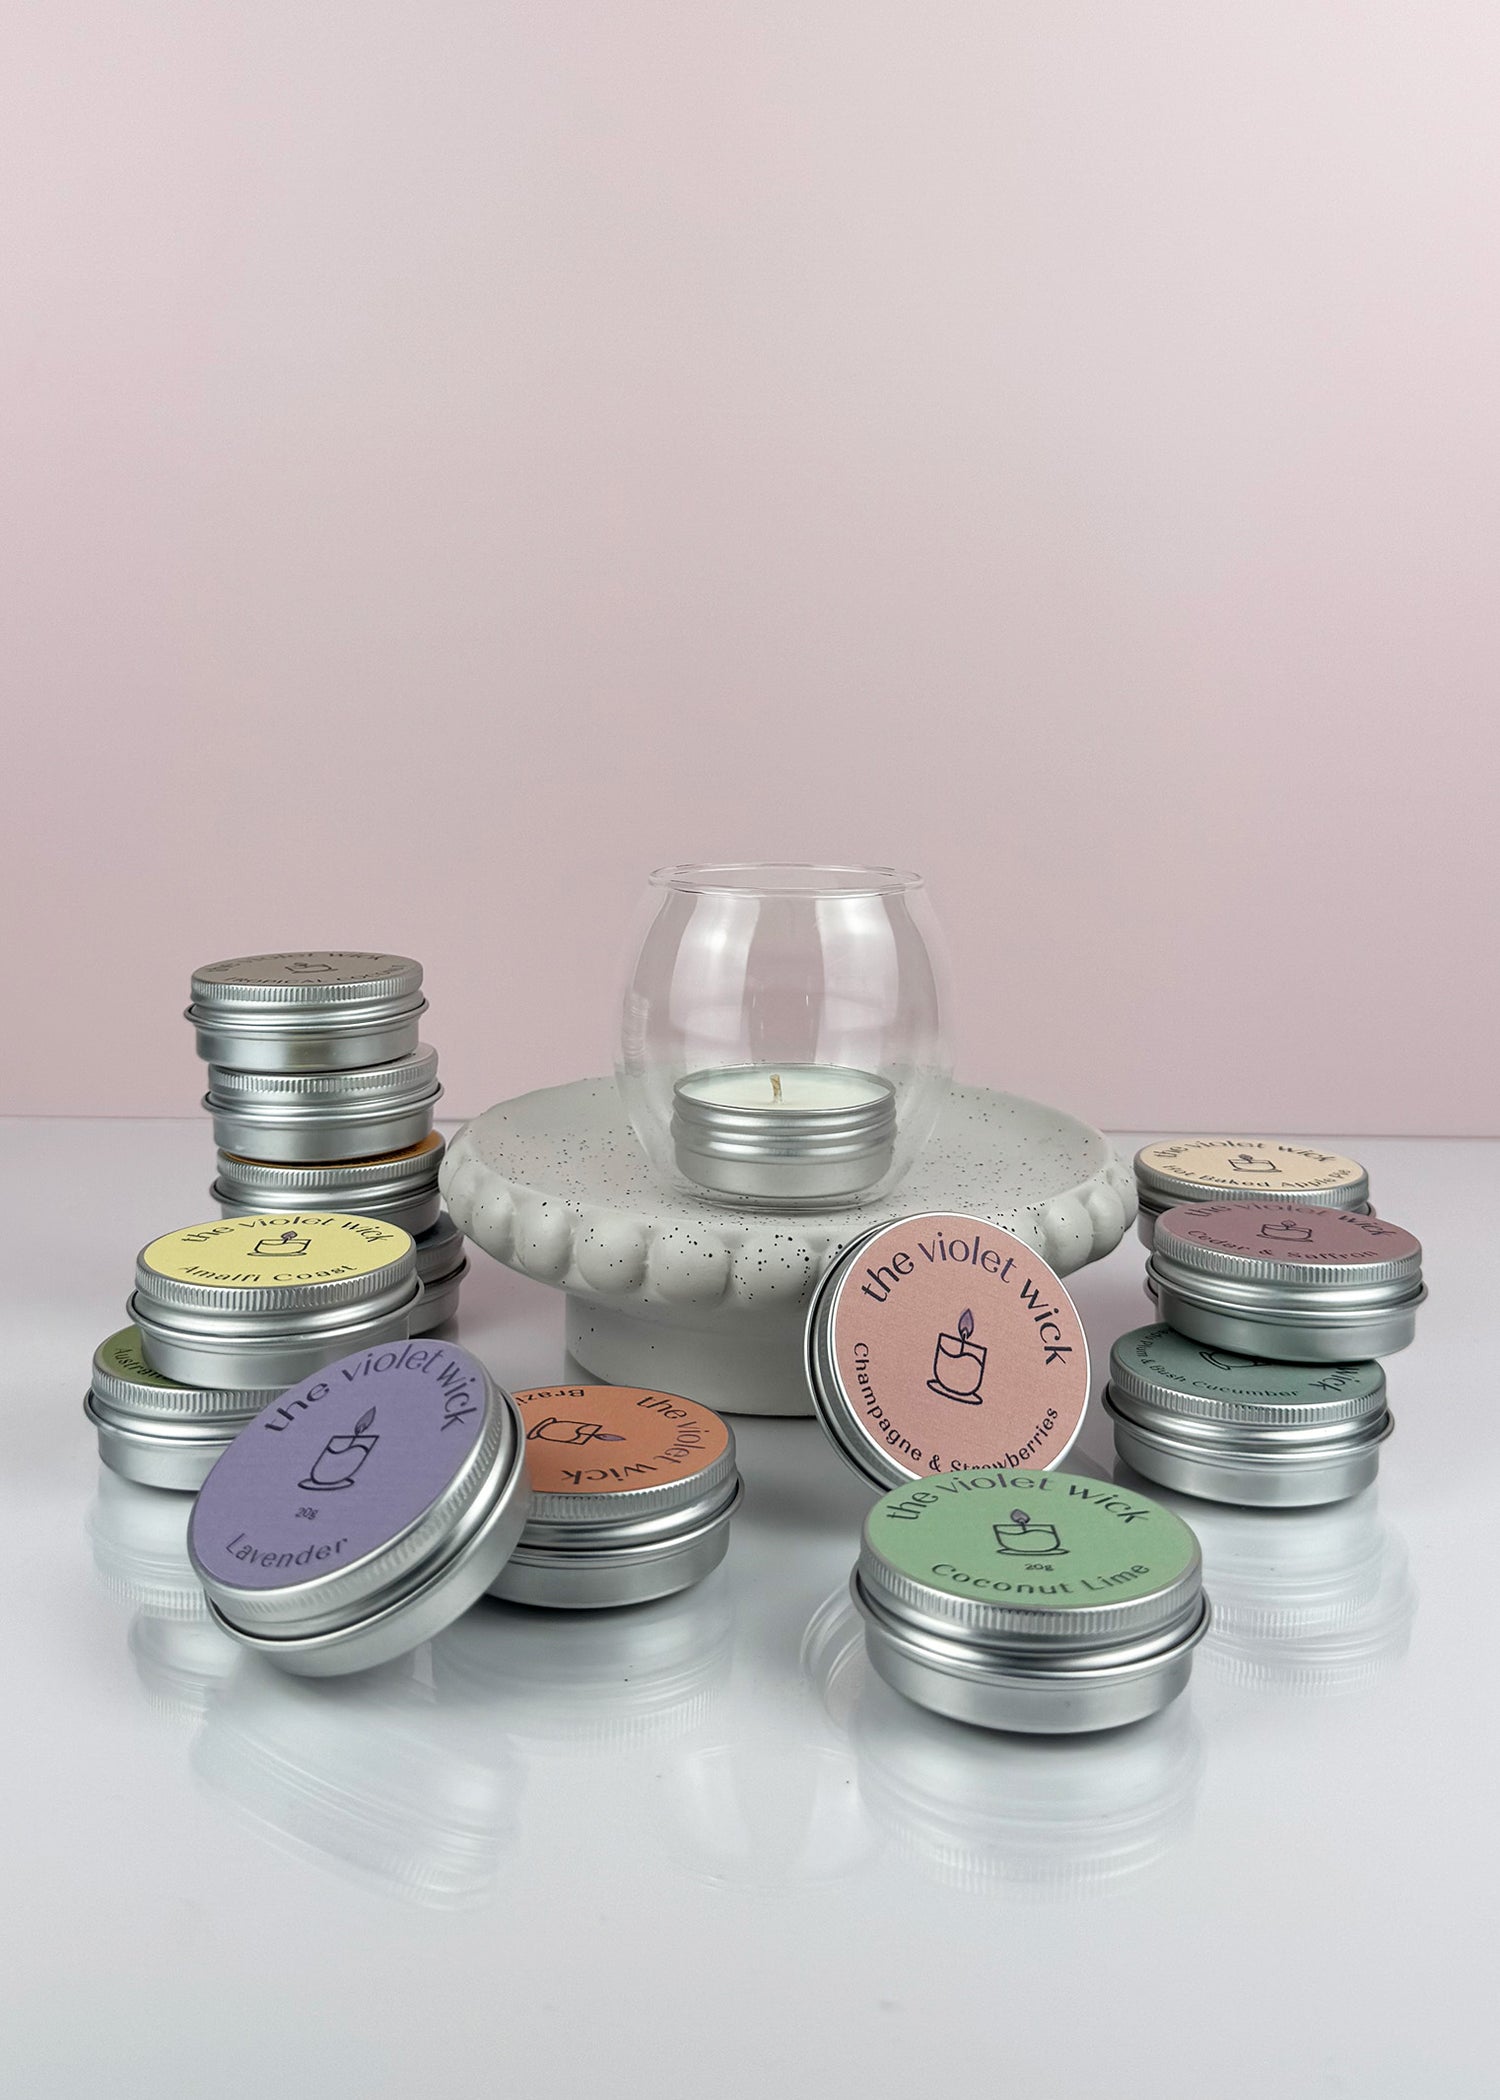 Welcome To The Violet Wick Luxury Soy Candles